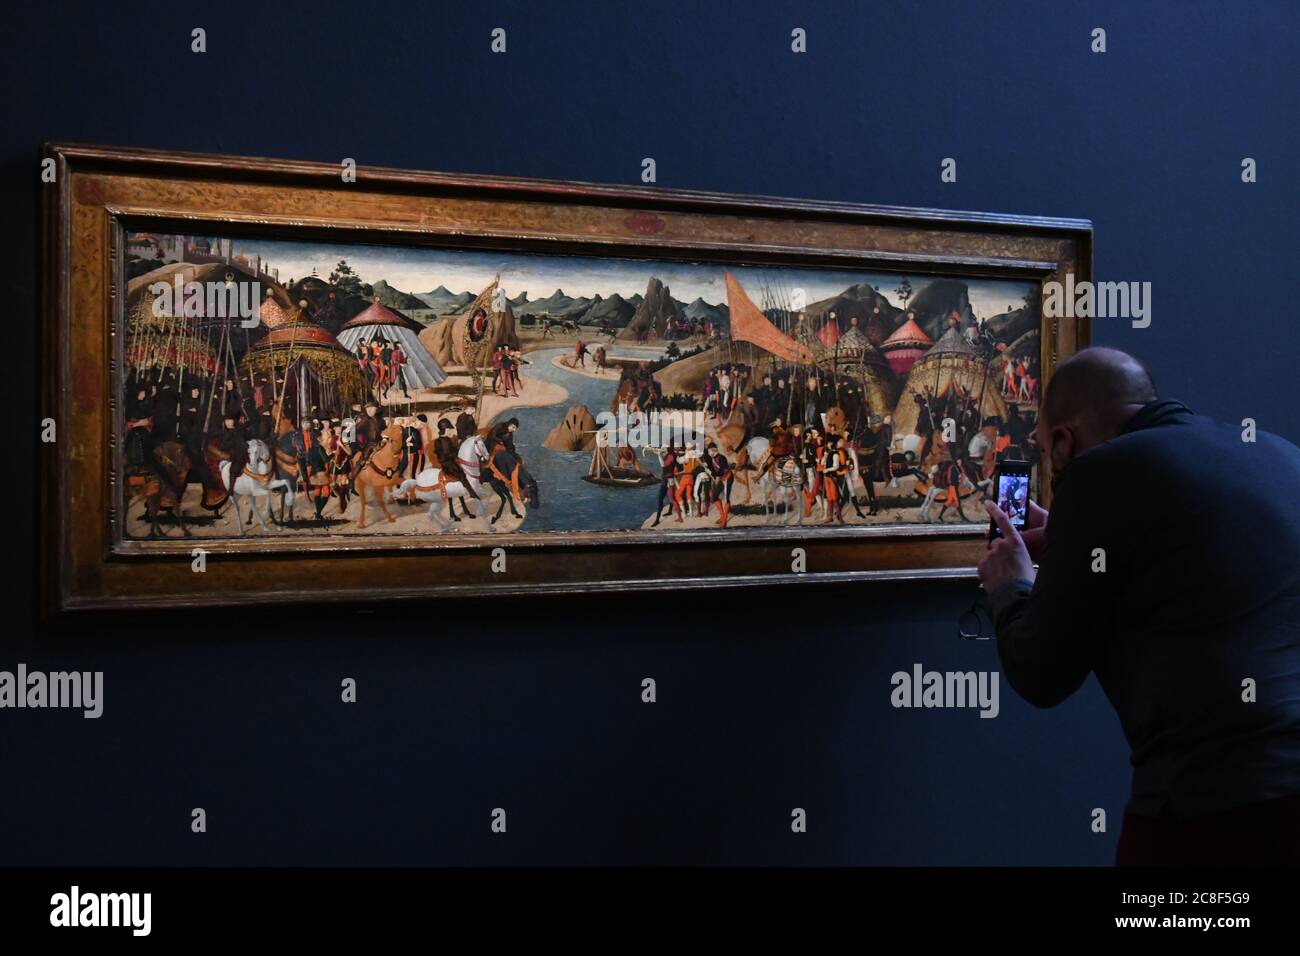 London, UK - 23 July 2020. SothebyÕs present Rembrandt to Richter, a one-off auction and exhibition that spans over half a millennium of art history,  unveiling over 70 works showcasing 500 years of art history at Sotheby's London. Paolo Uccello. Battle on the Banks of a River, Probably the Battle of Metaurus. Estimate £600,000-£800,000    (EMBARGOED for release until 9am BST 24 July 2020) Credit: Nils Jorgensen/Alamy Live News Stock Photo